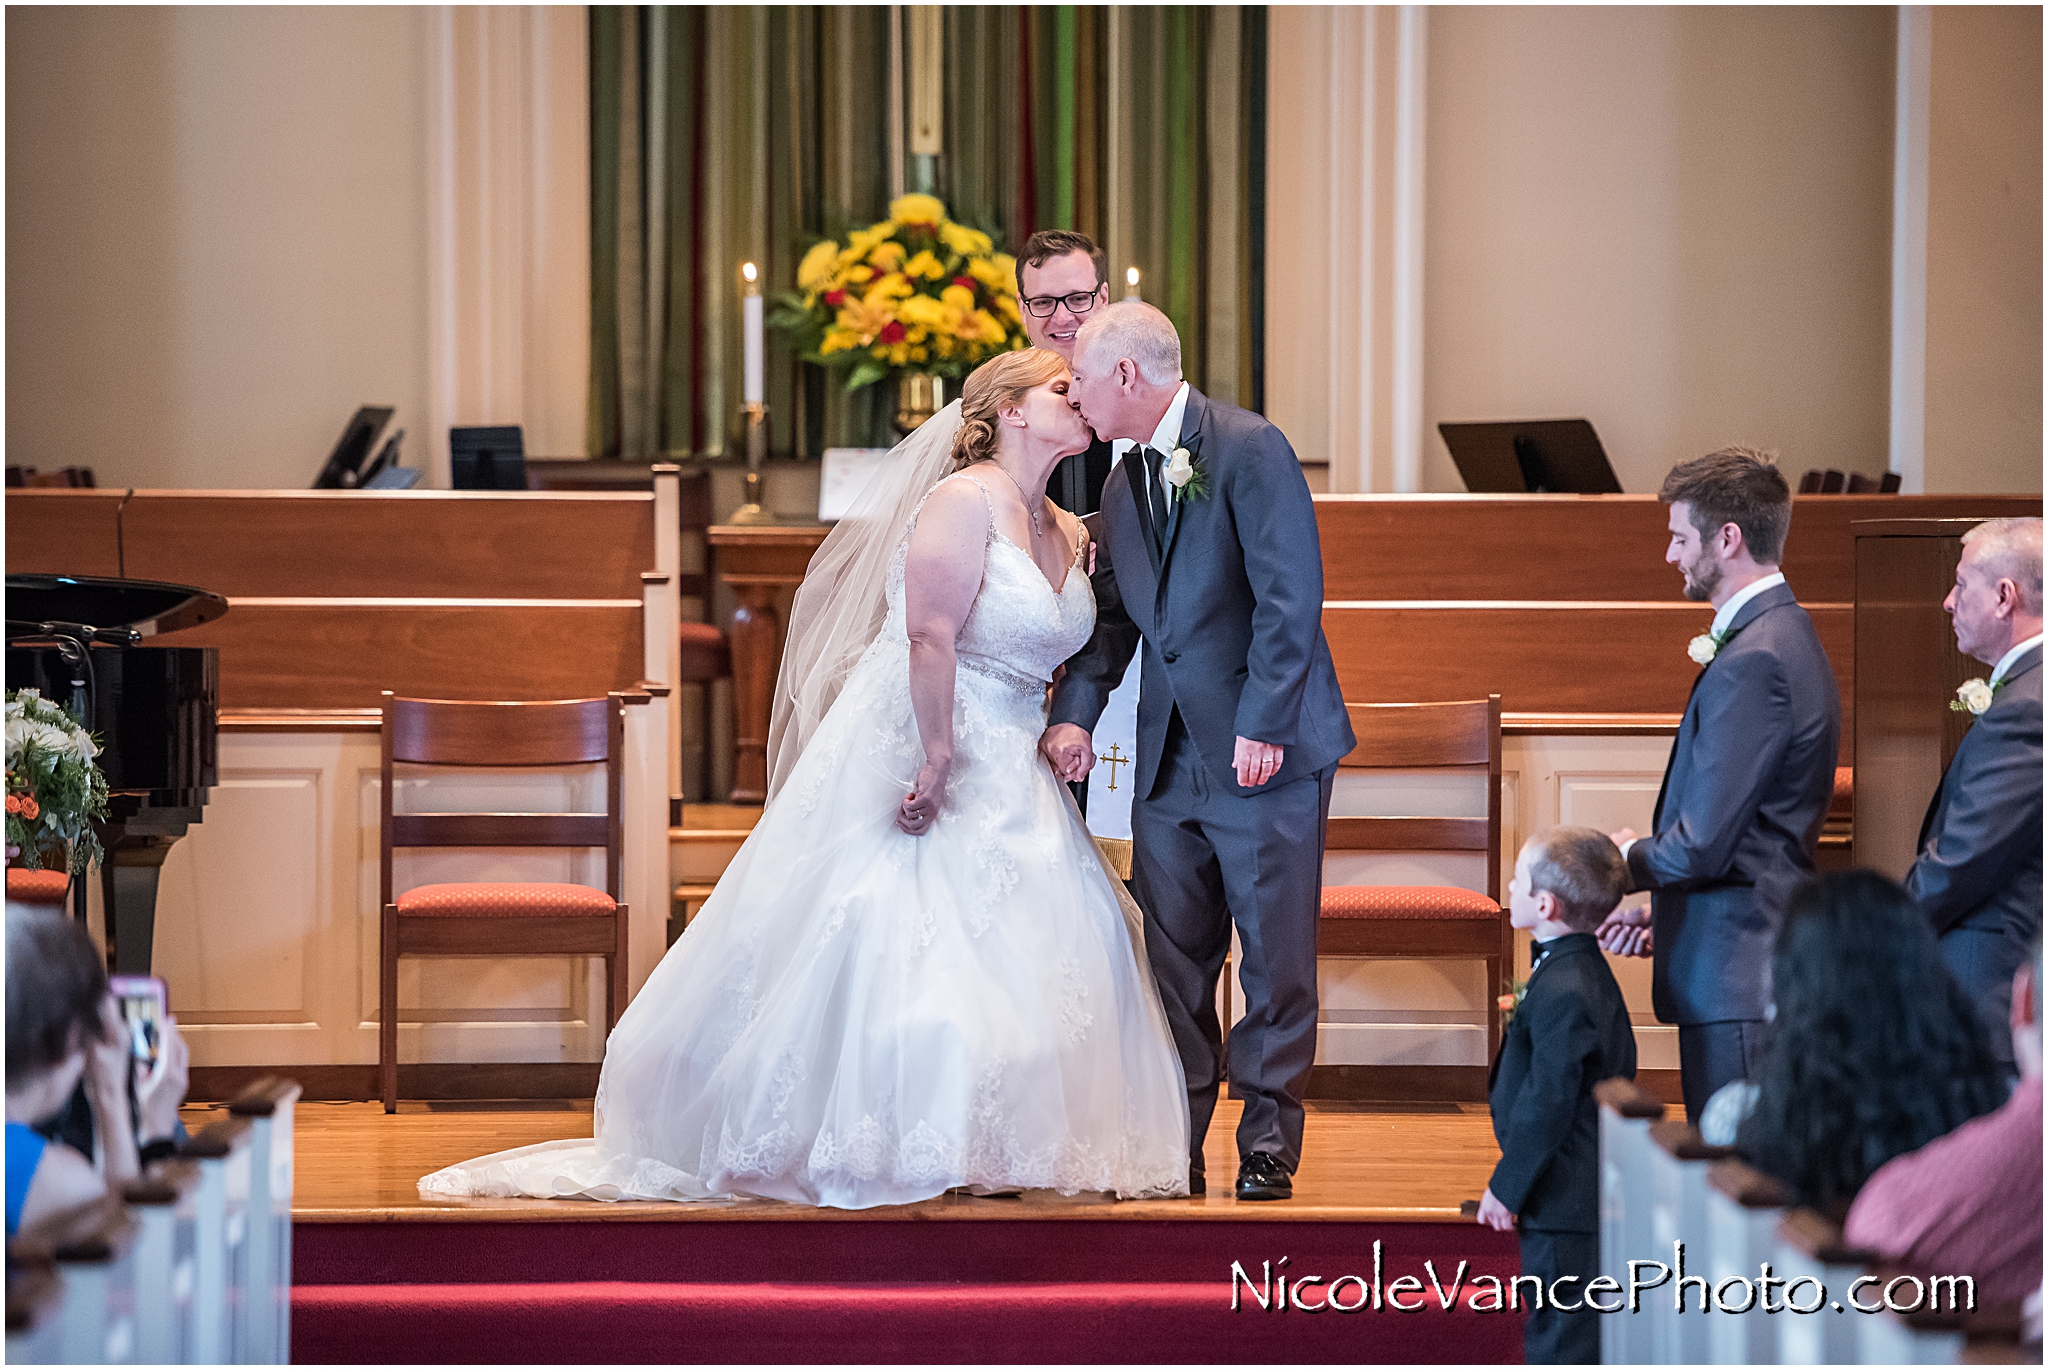 The couple has this first kiss as husband and wife.